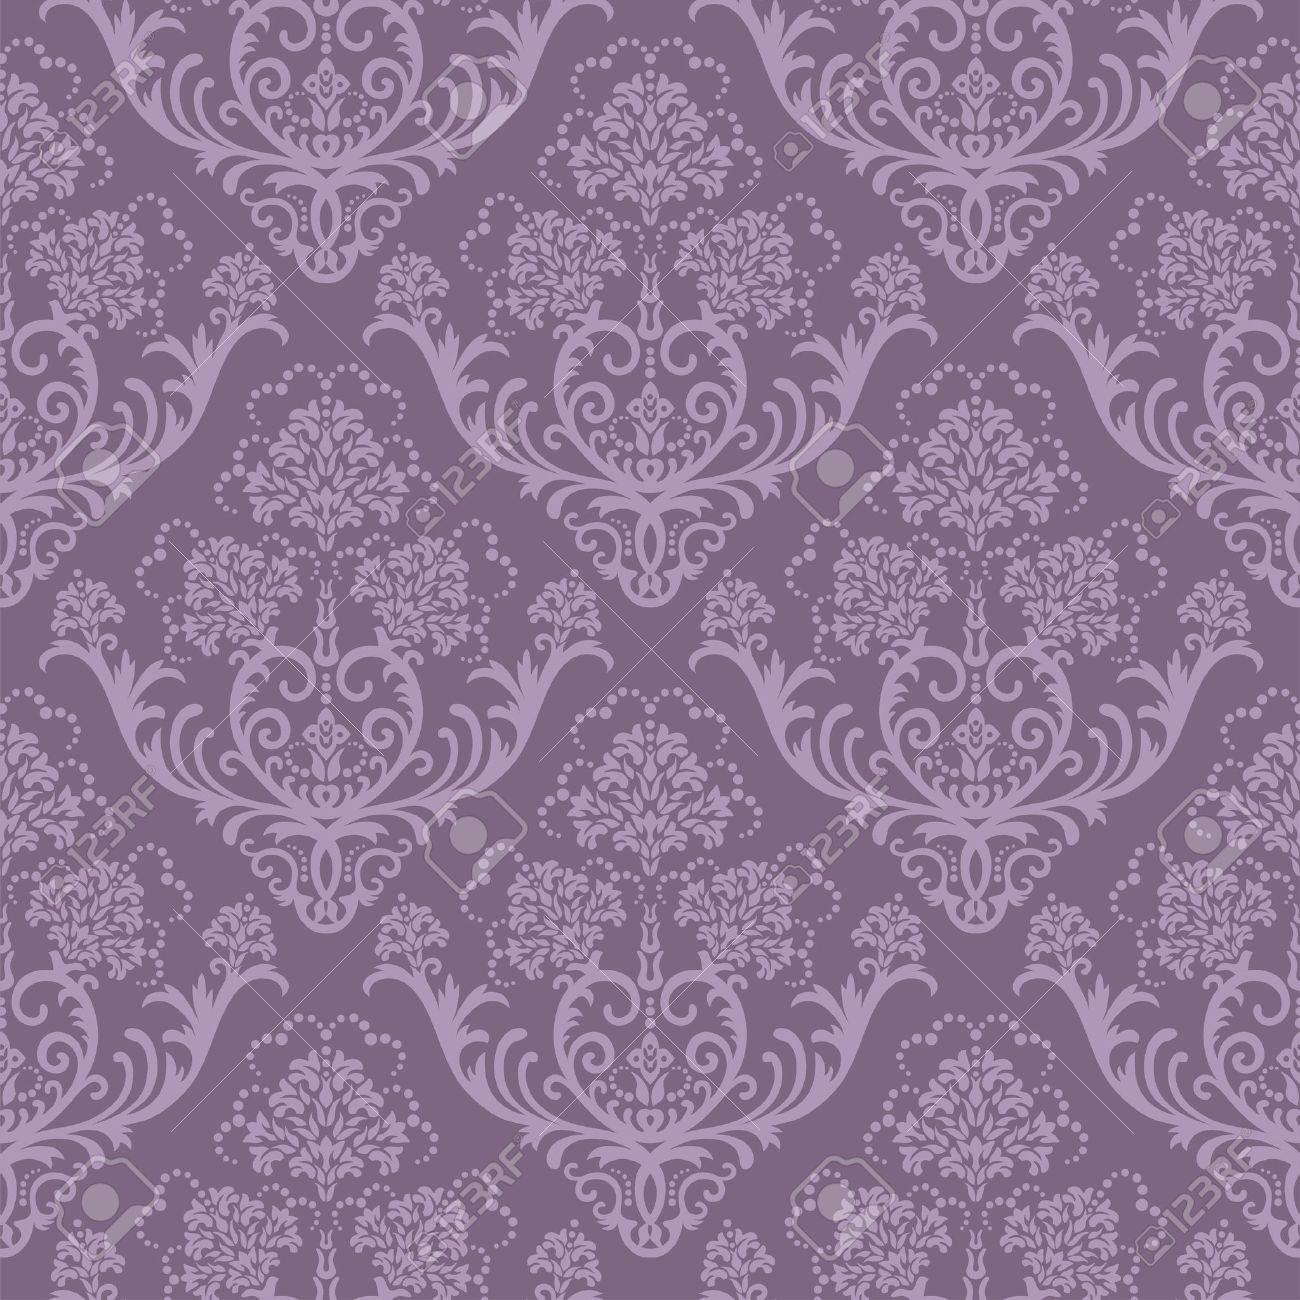 Buy Graham  Brown Gothic Damask Wallpaper from the Next UK online shop